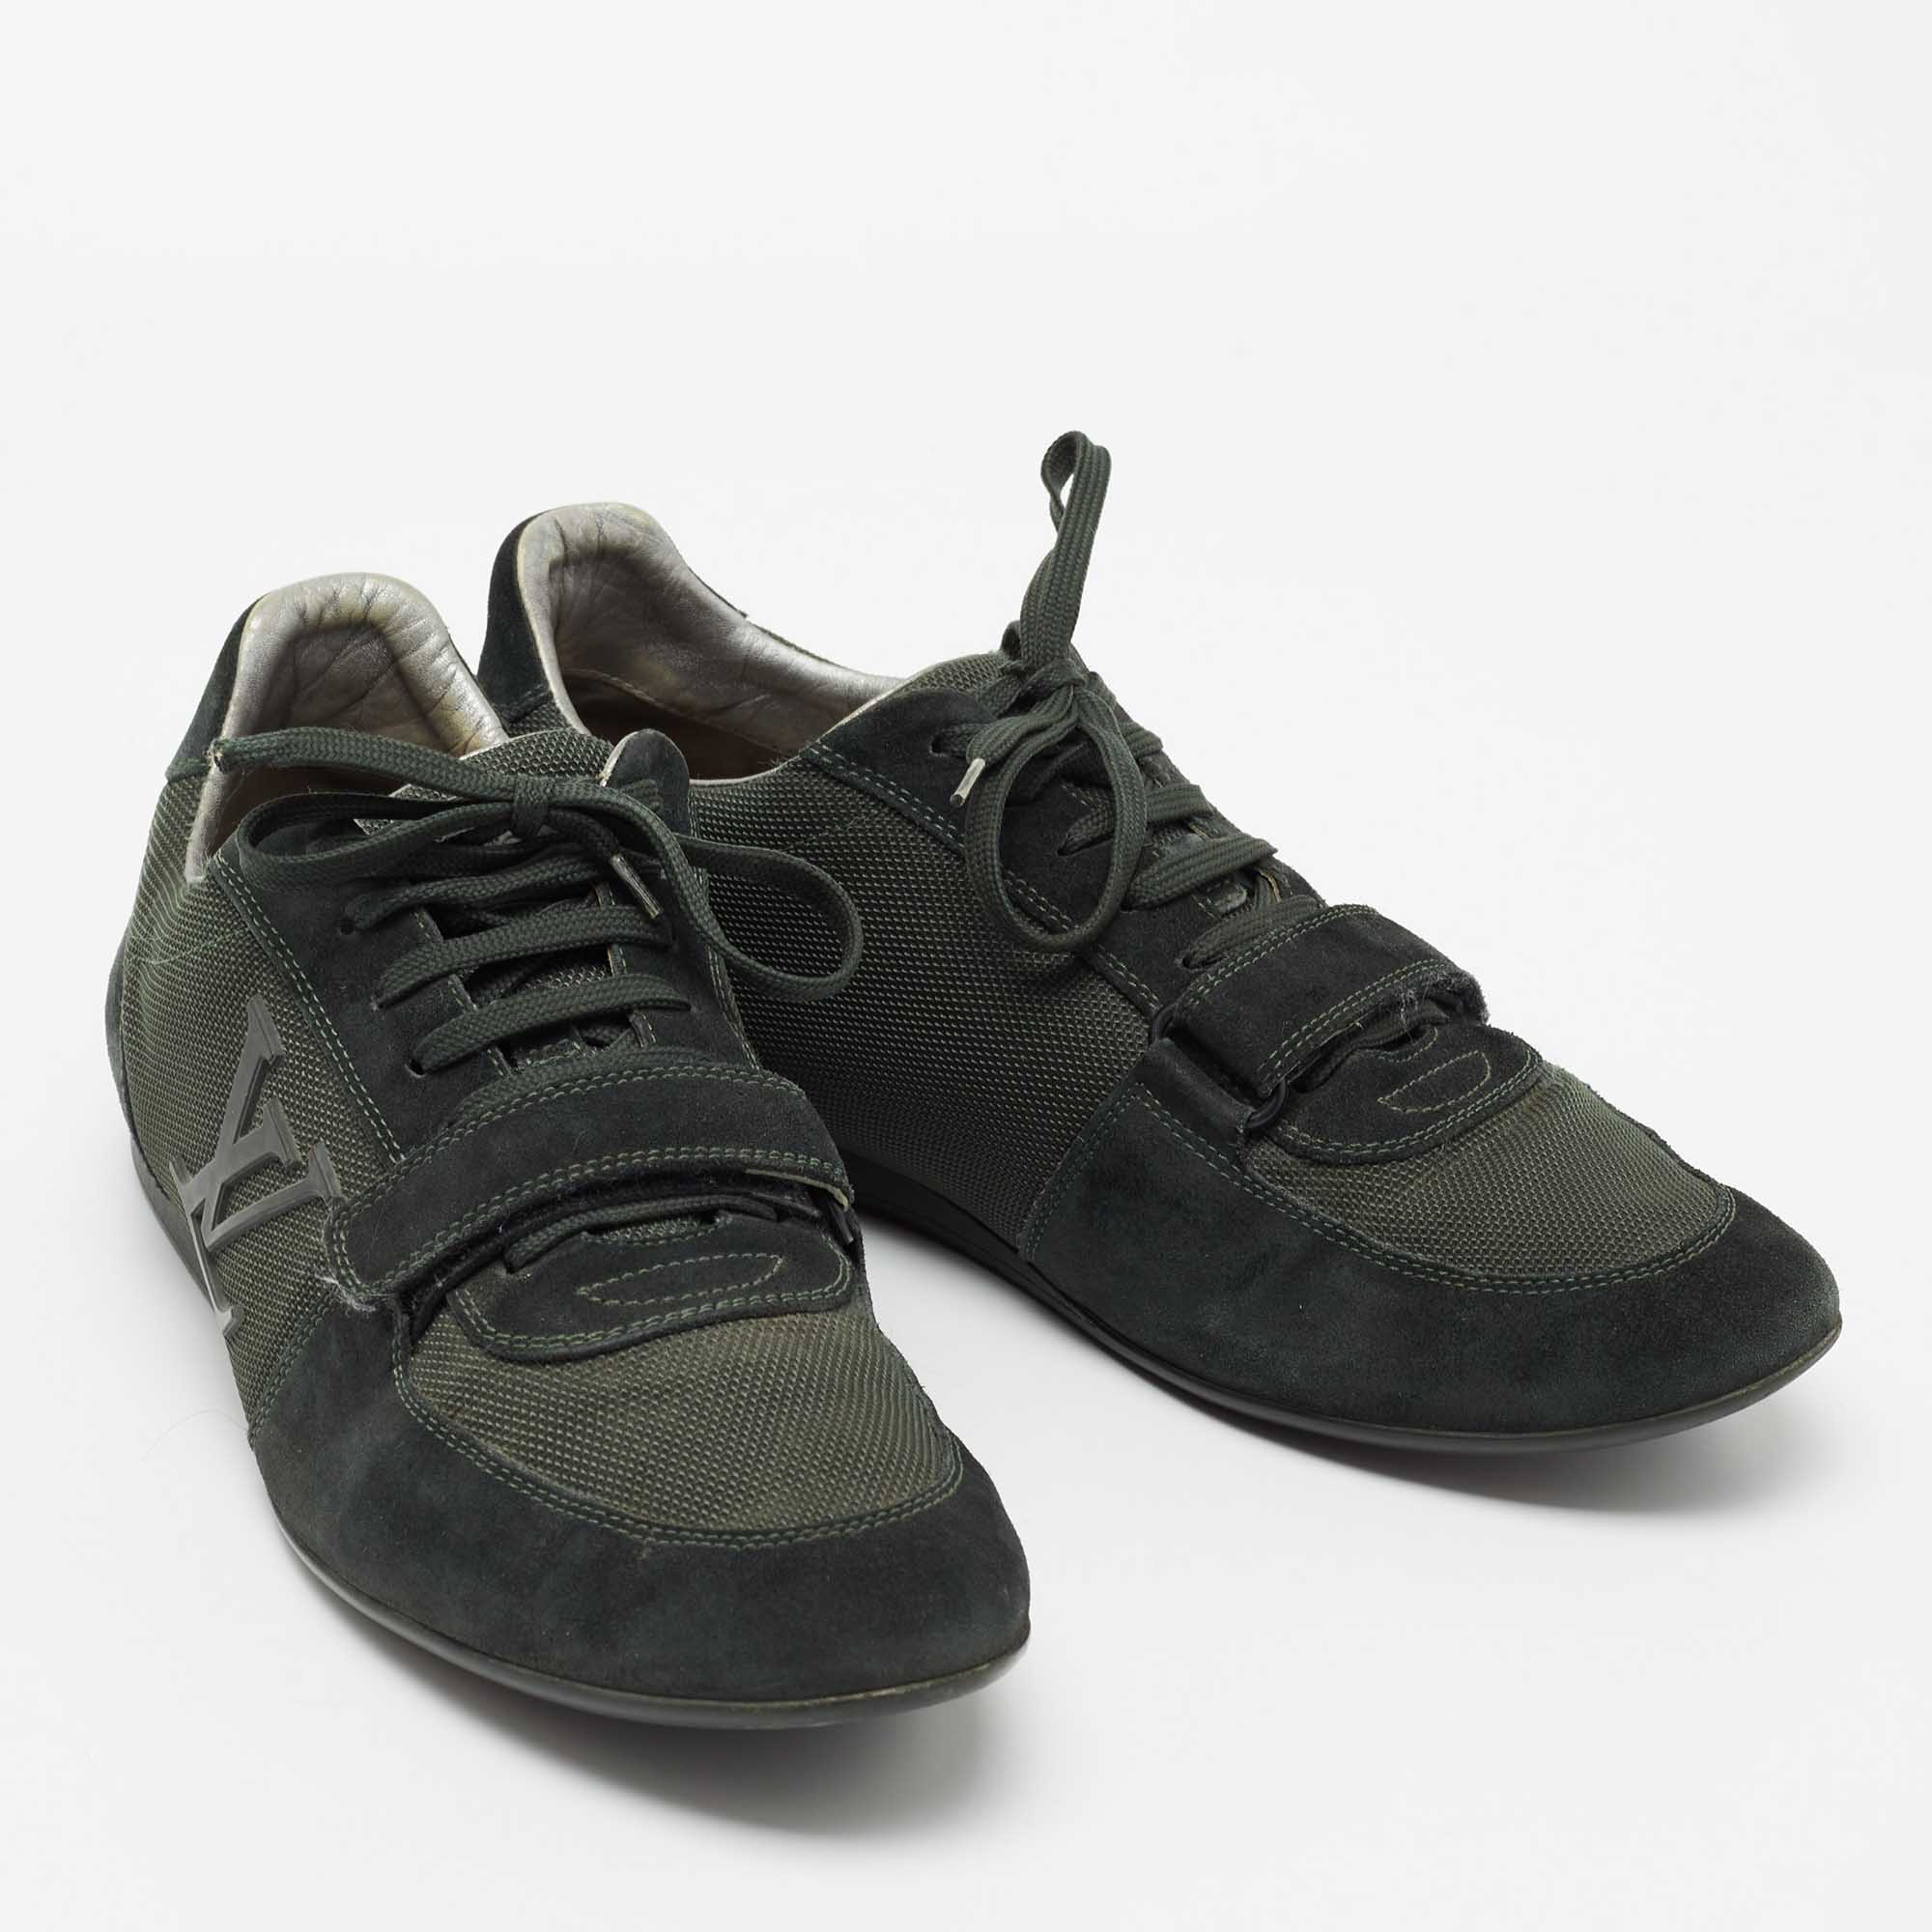 LOUIS VUITTON Low-cut sneakers / US7 / green / suede / ABBESSES